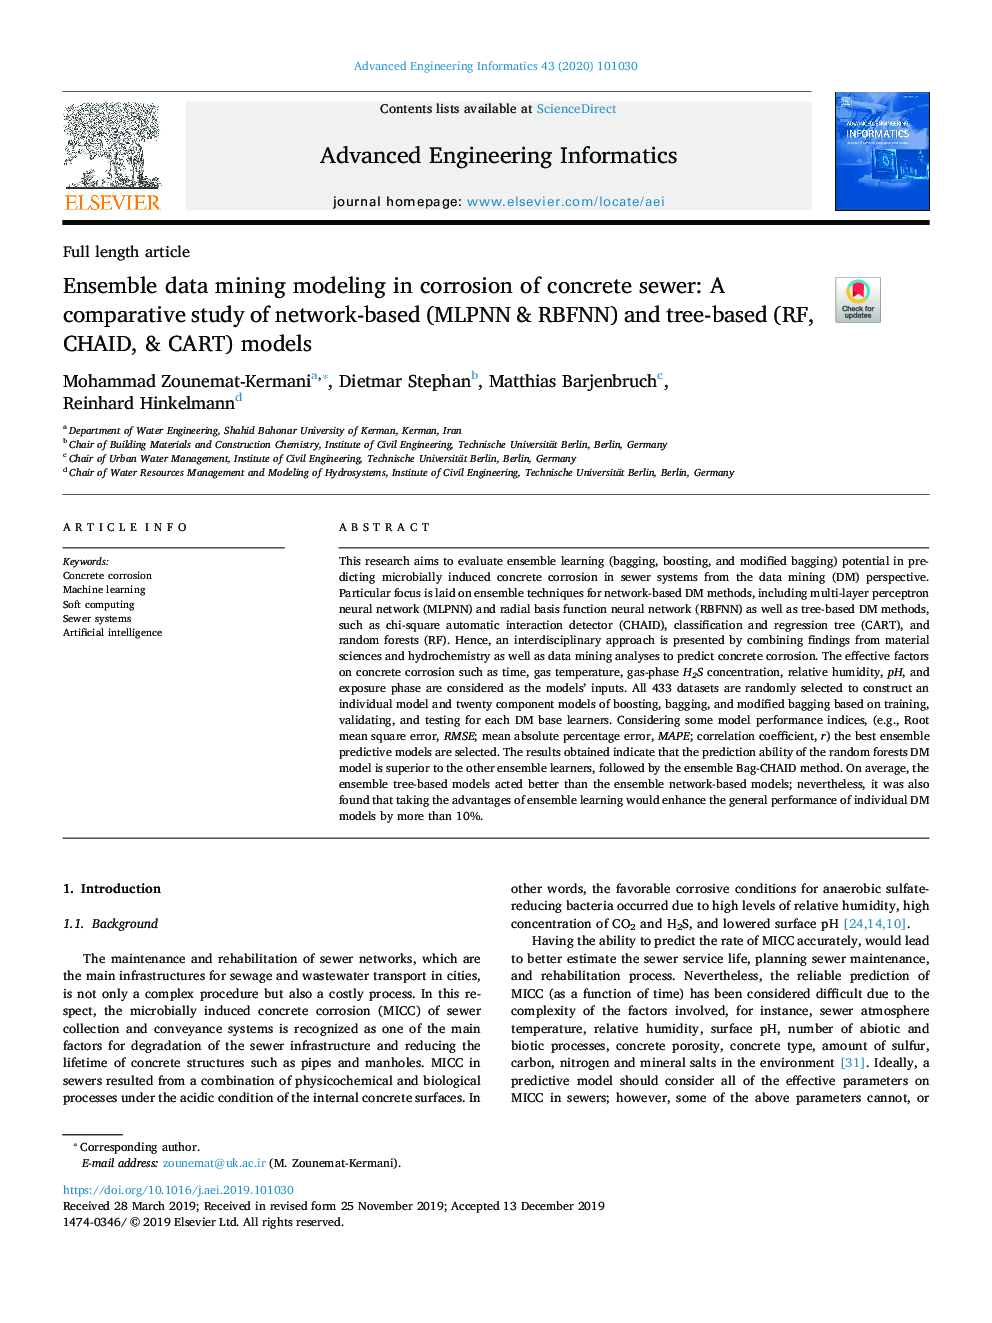 Ensemble data mining modeling in corrosion of concrete sewer: A comparative study of network-based (MLPNN & RBFNN) and tree-based (RF, CHAID, & CART) models